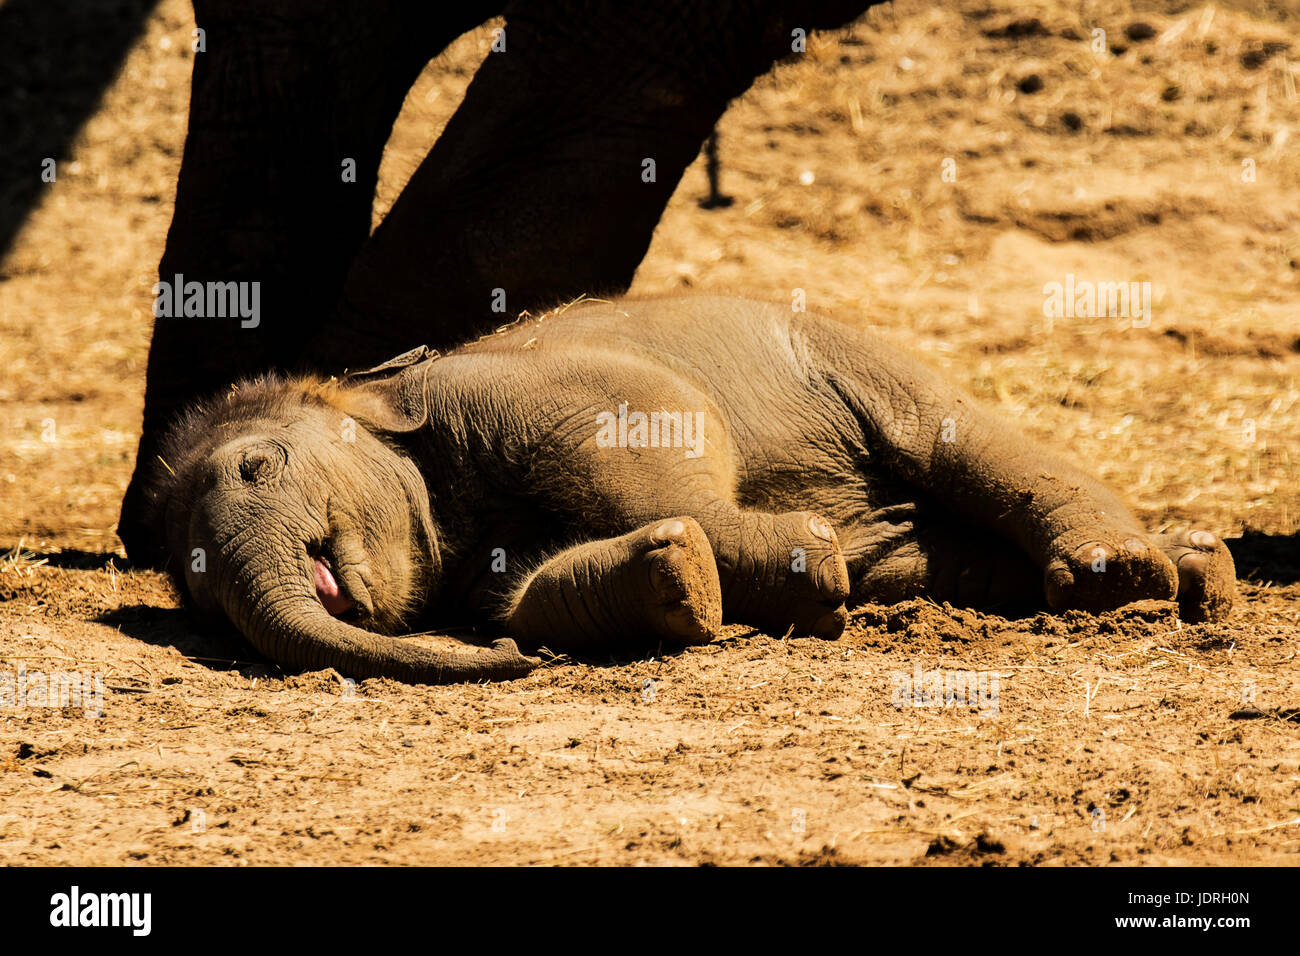 Ìt was Nap time for this Baby Elephant while its Mother stood by Stock Photo